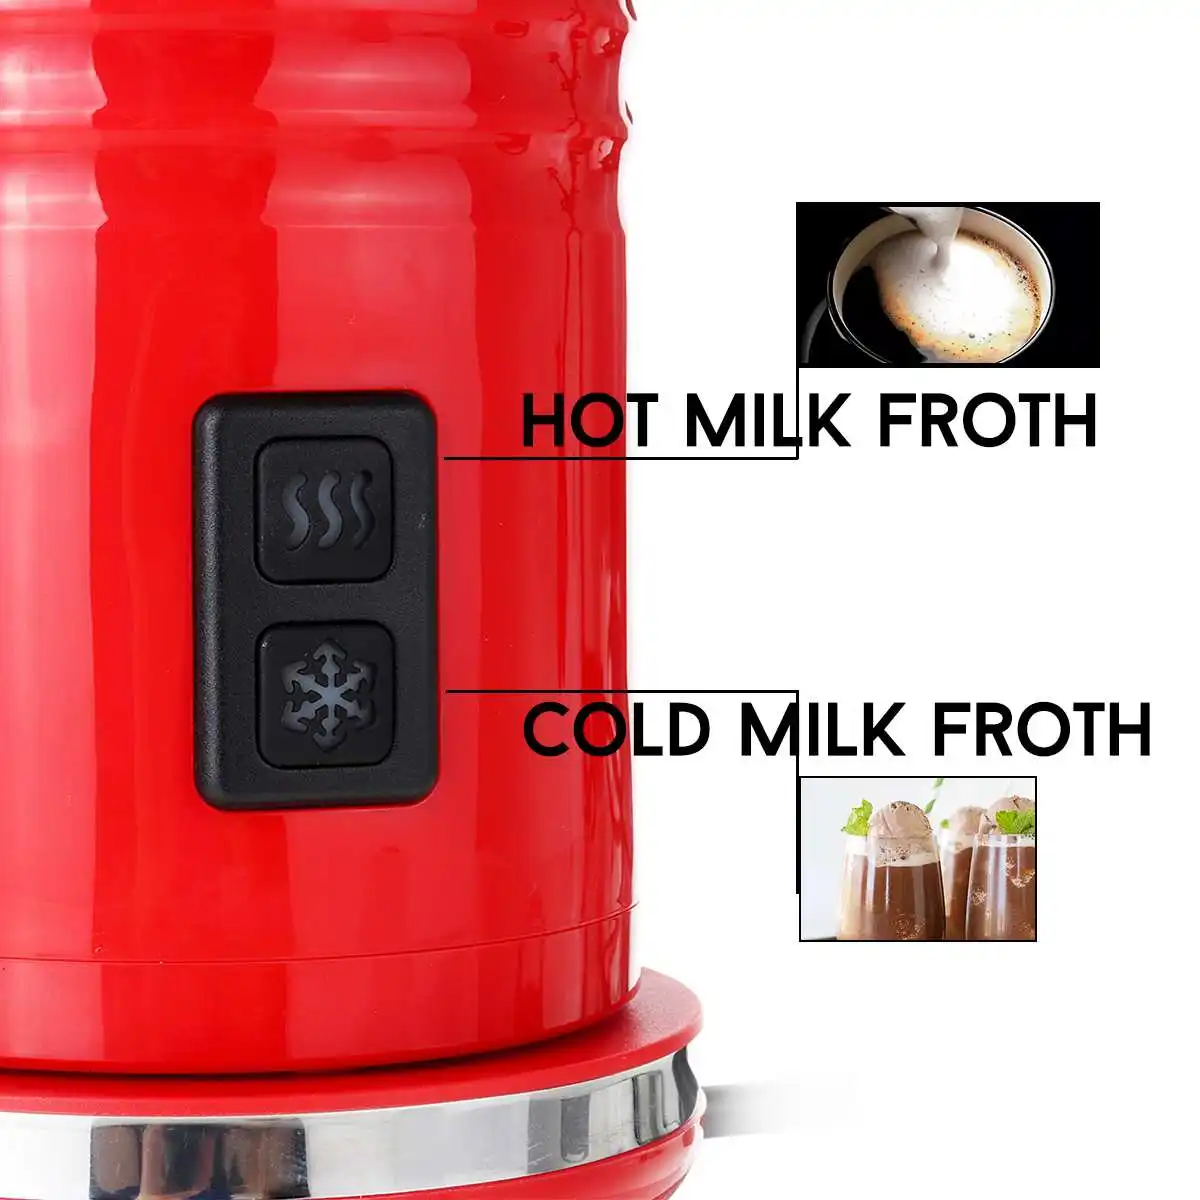 220V Electric Hot / Cold Milk Frother Foamer Warmer Latte Cappuccino Coffee Temperature Keeping with Pull Cup Flower Needle Tool